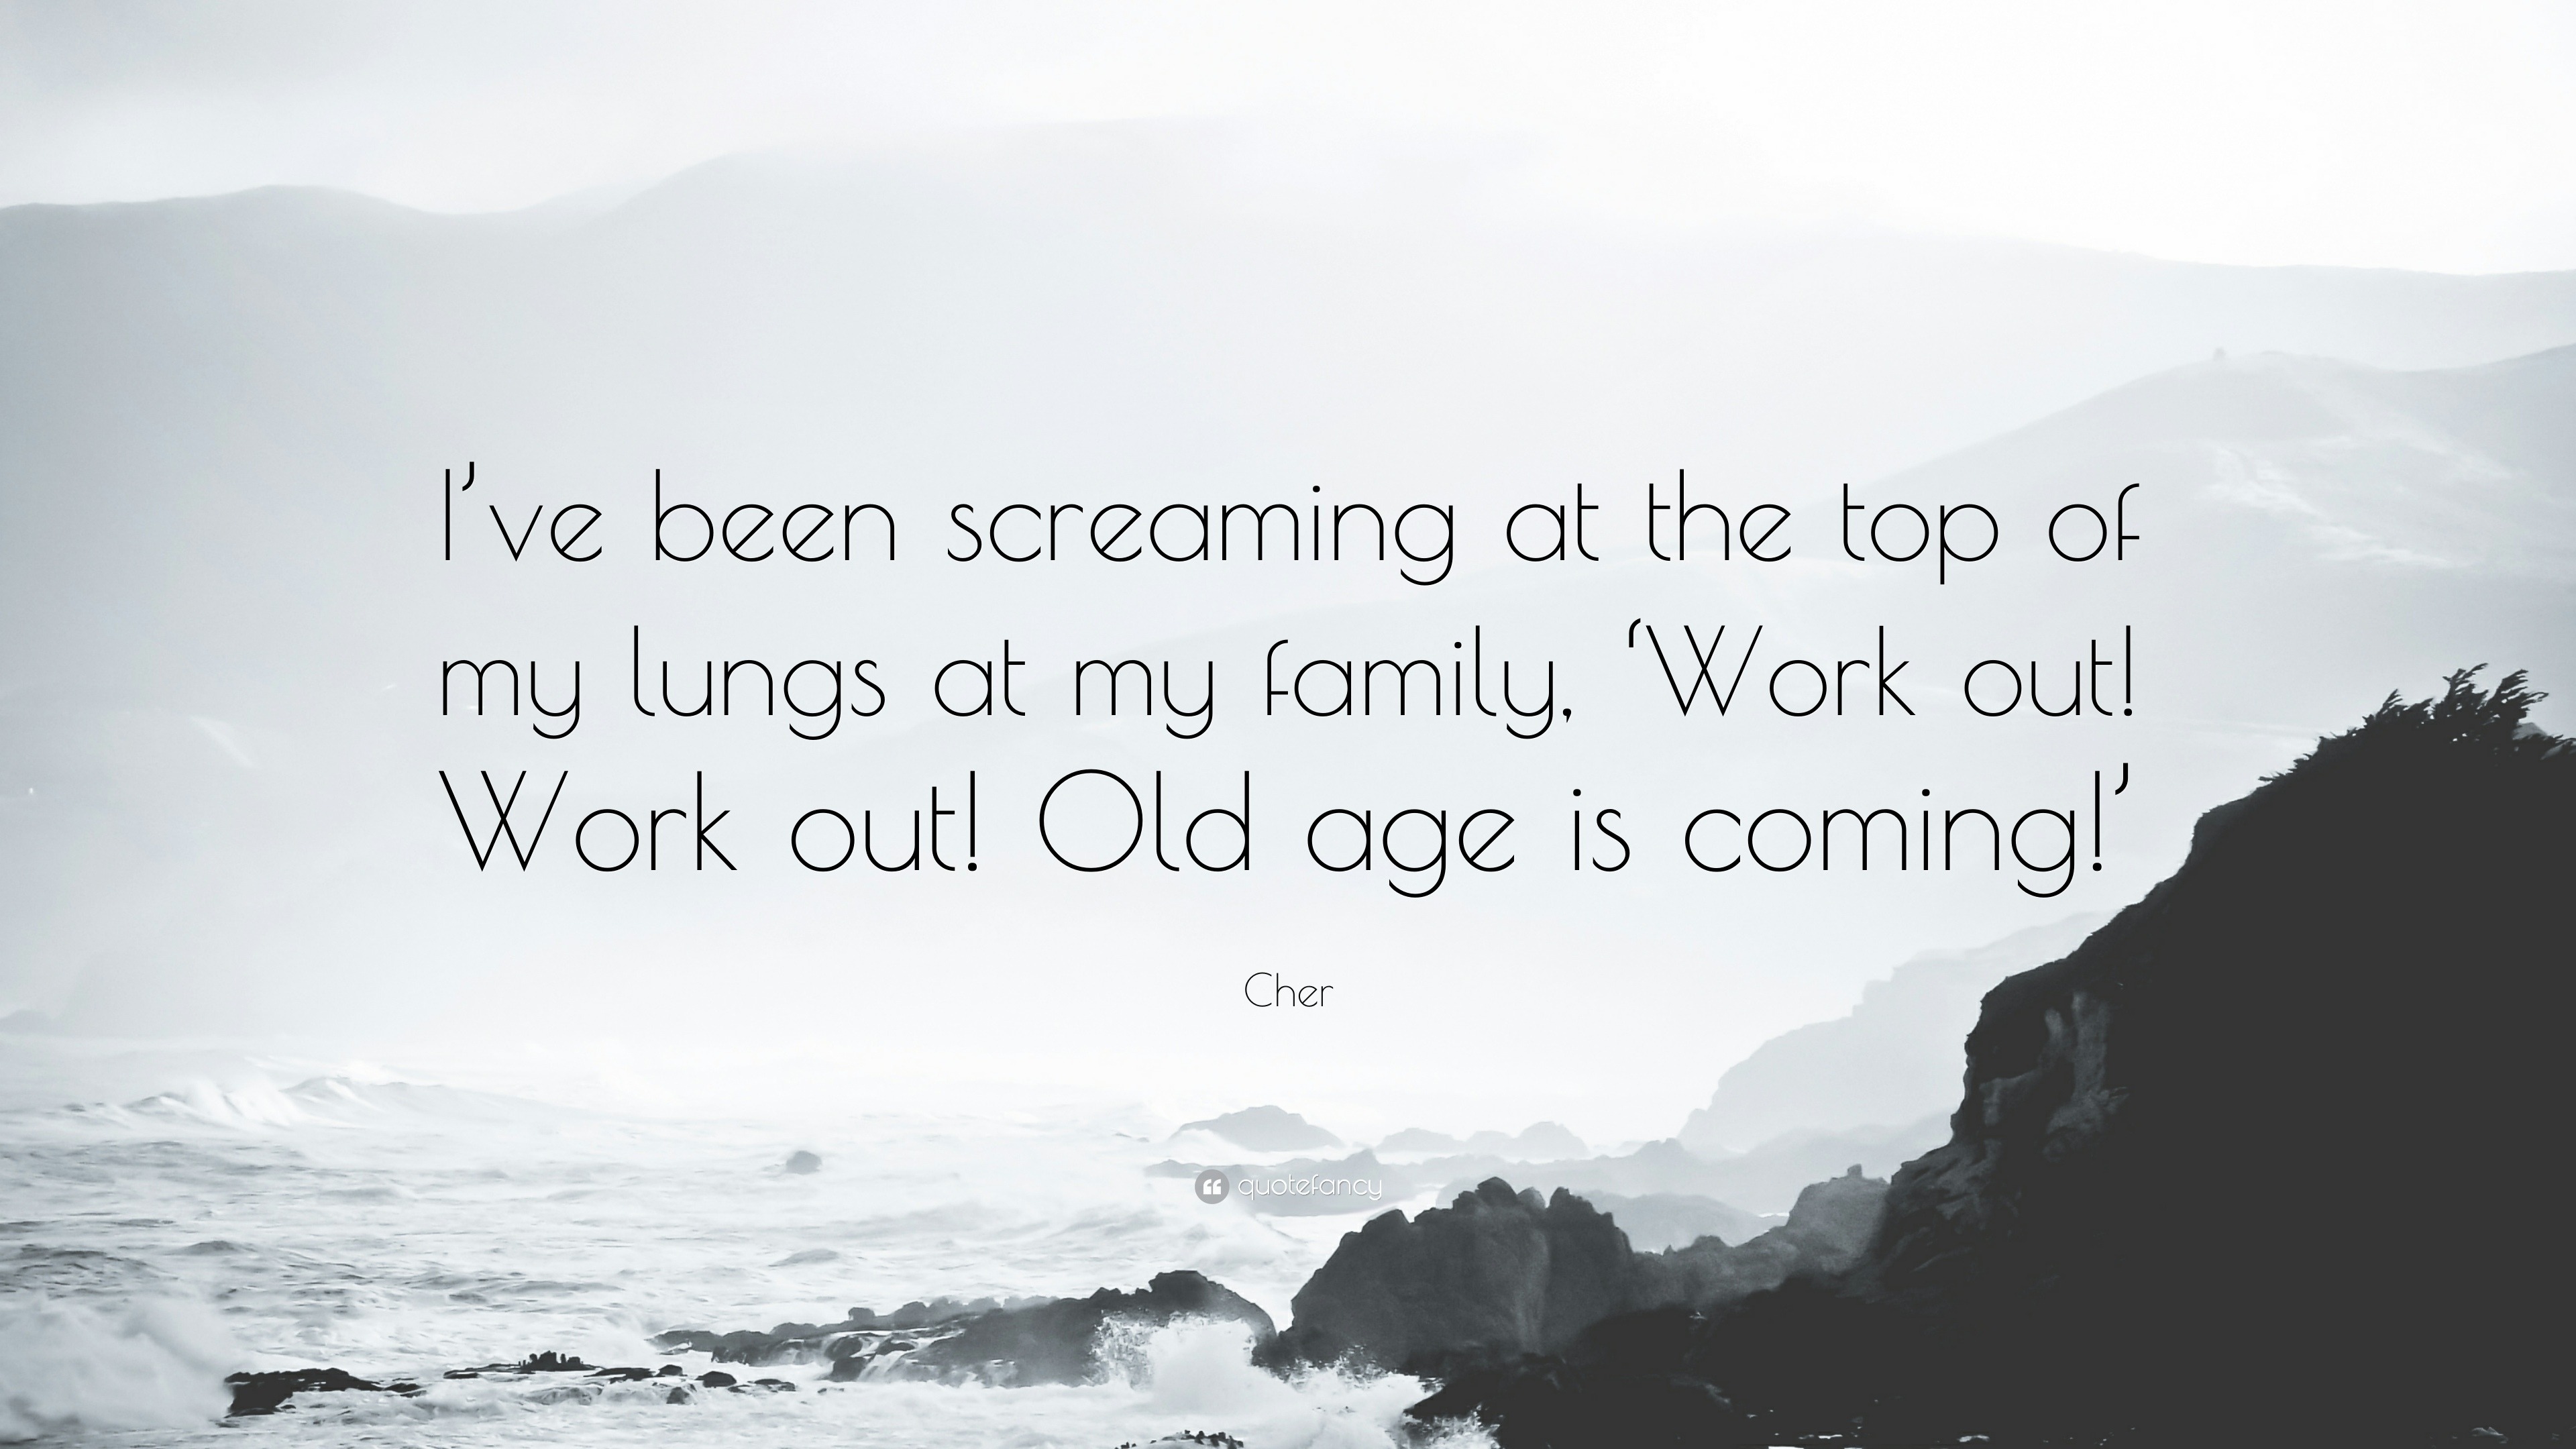 Cher Quote: “I've been screaming at the top of my lungs at my 'Work